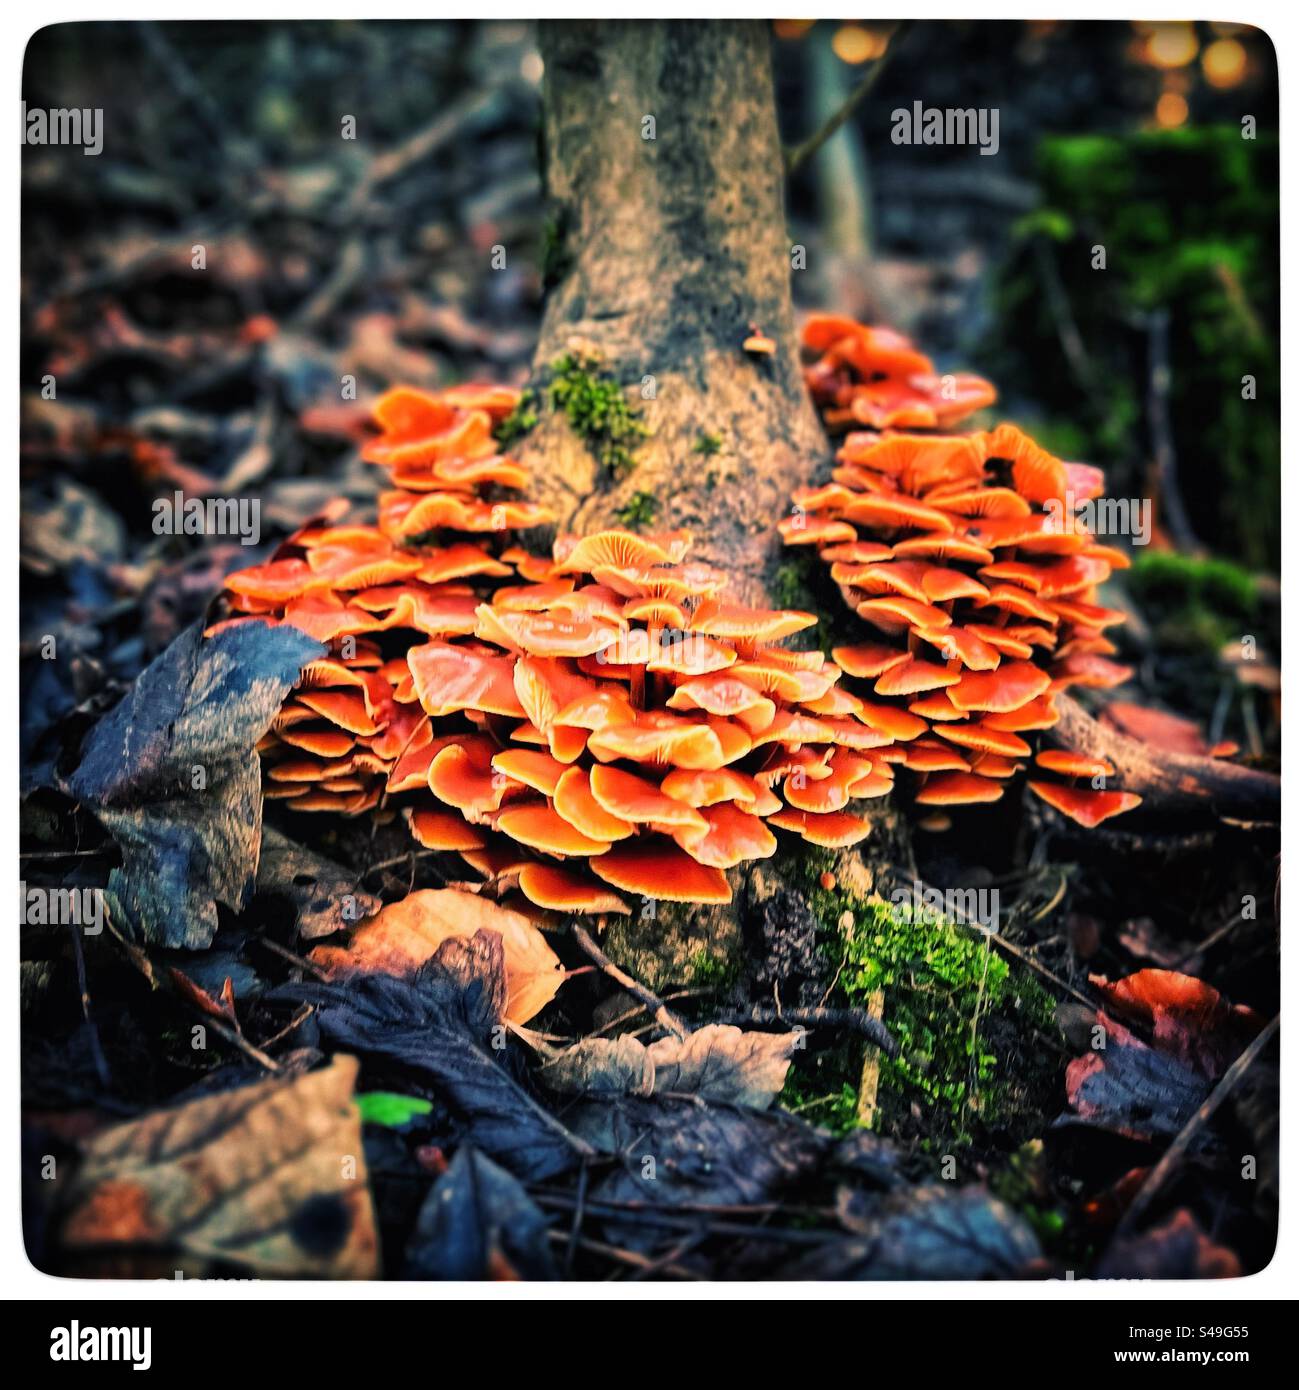 Orange fungus growing on the side of a tree trunk. Stock Photo